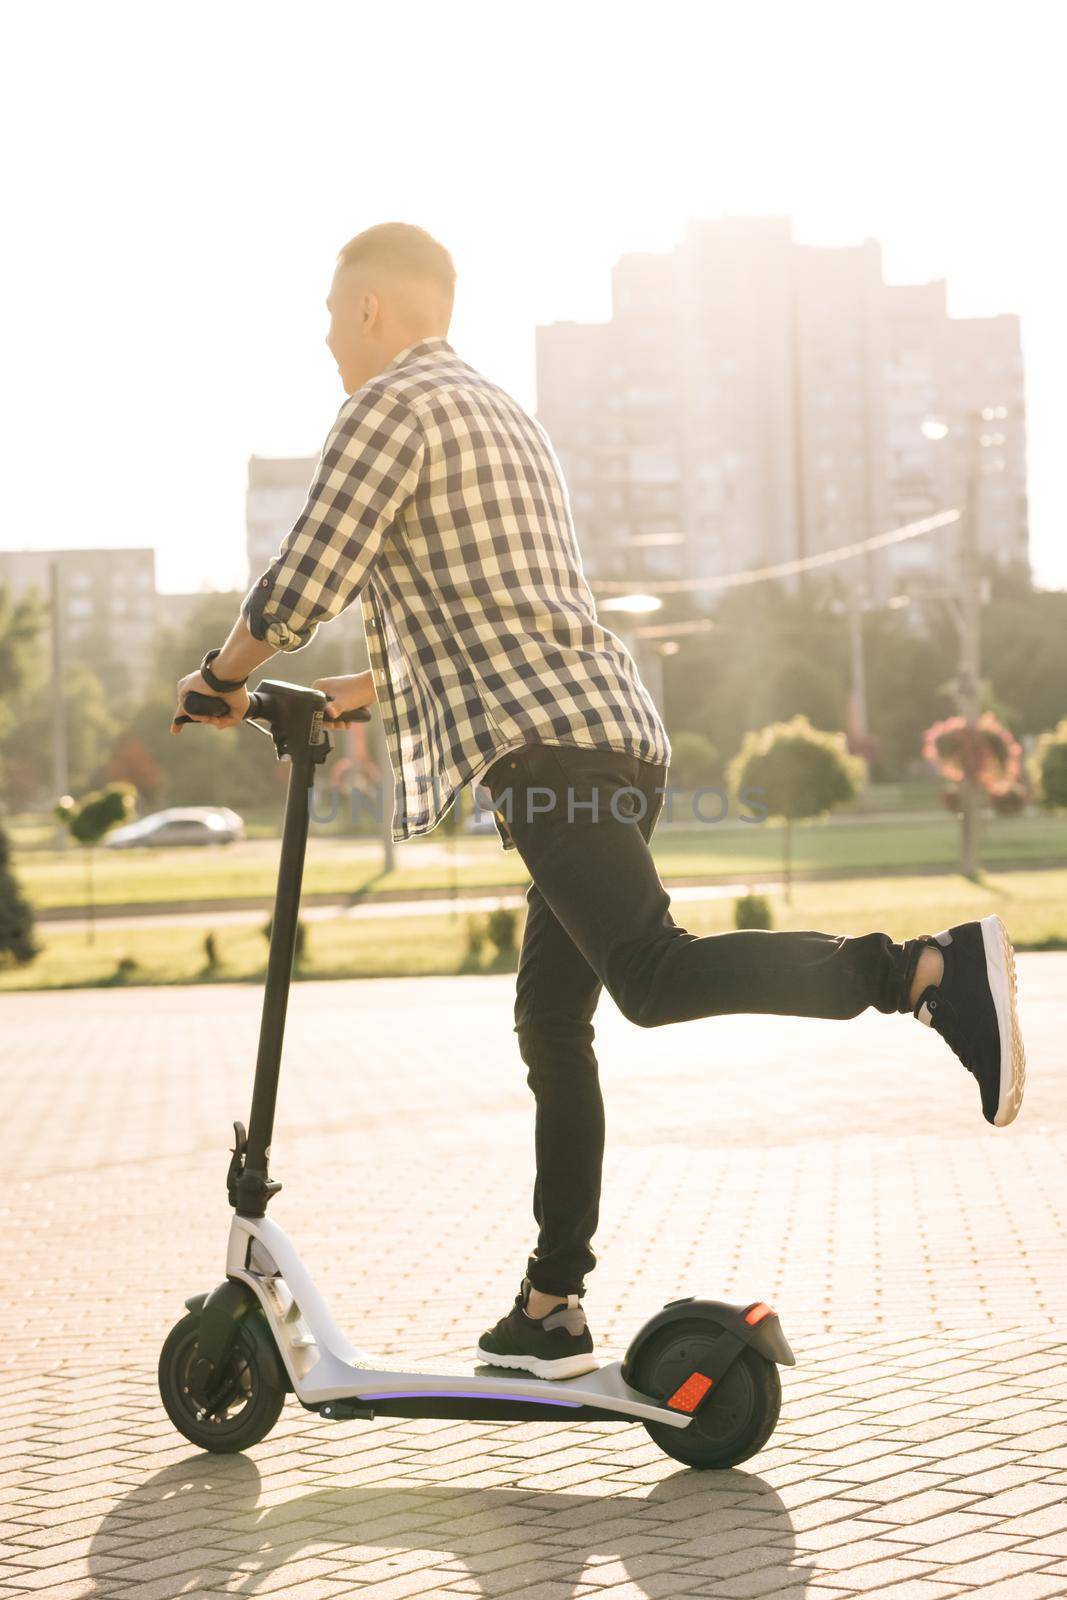 Hipster man commuting to work through city on electric scooter. Eco-friendly transportation. Fast speed driving electric transport. Man riding an escooter. Ecology and urban lifestyle by uflypro